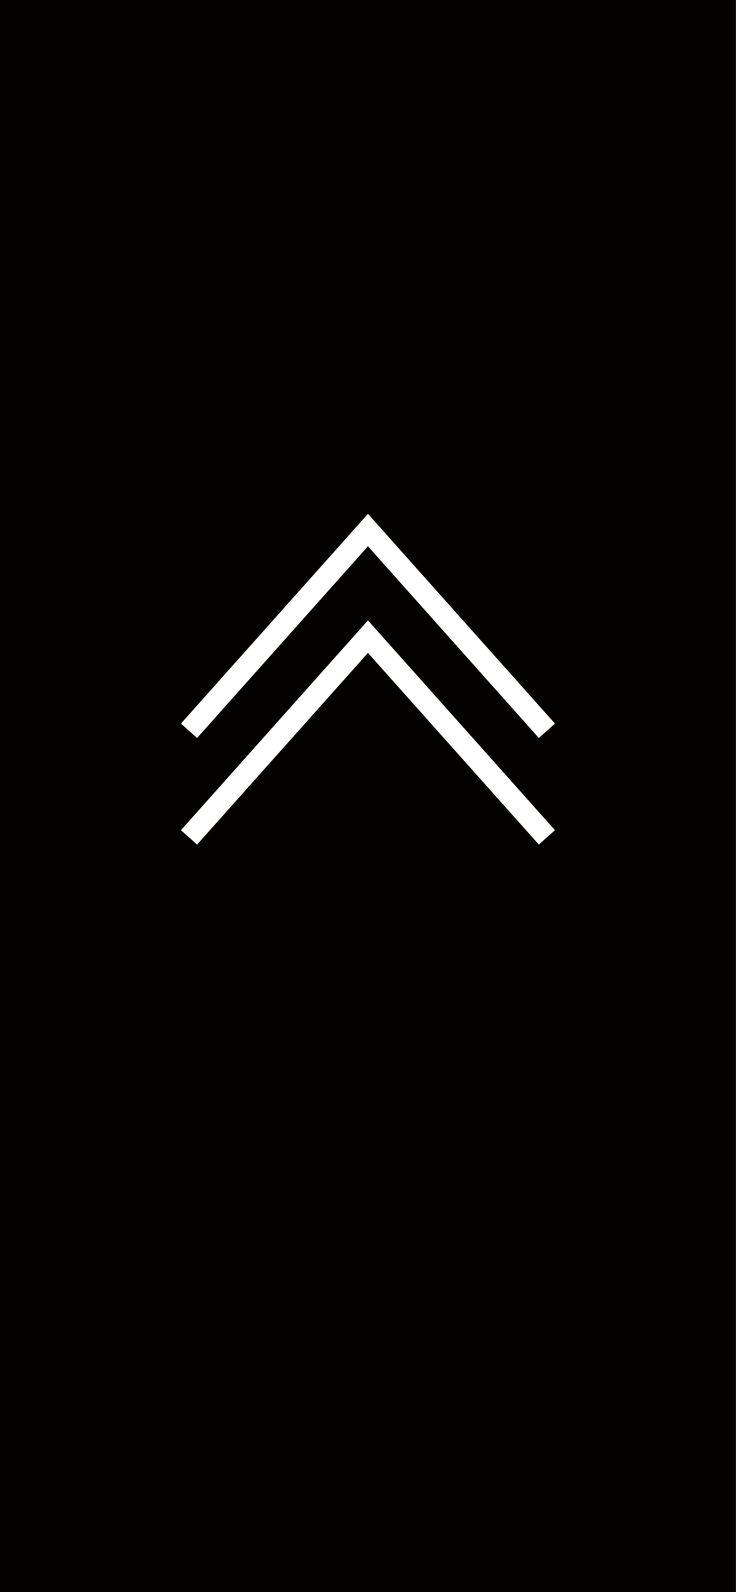 Viking iPhone Wallpaper Symbols Create Your Own Reality